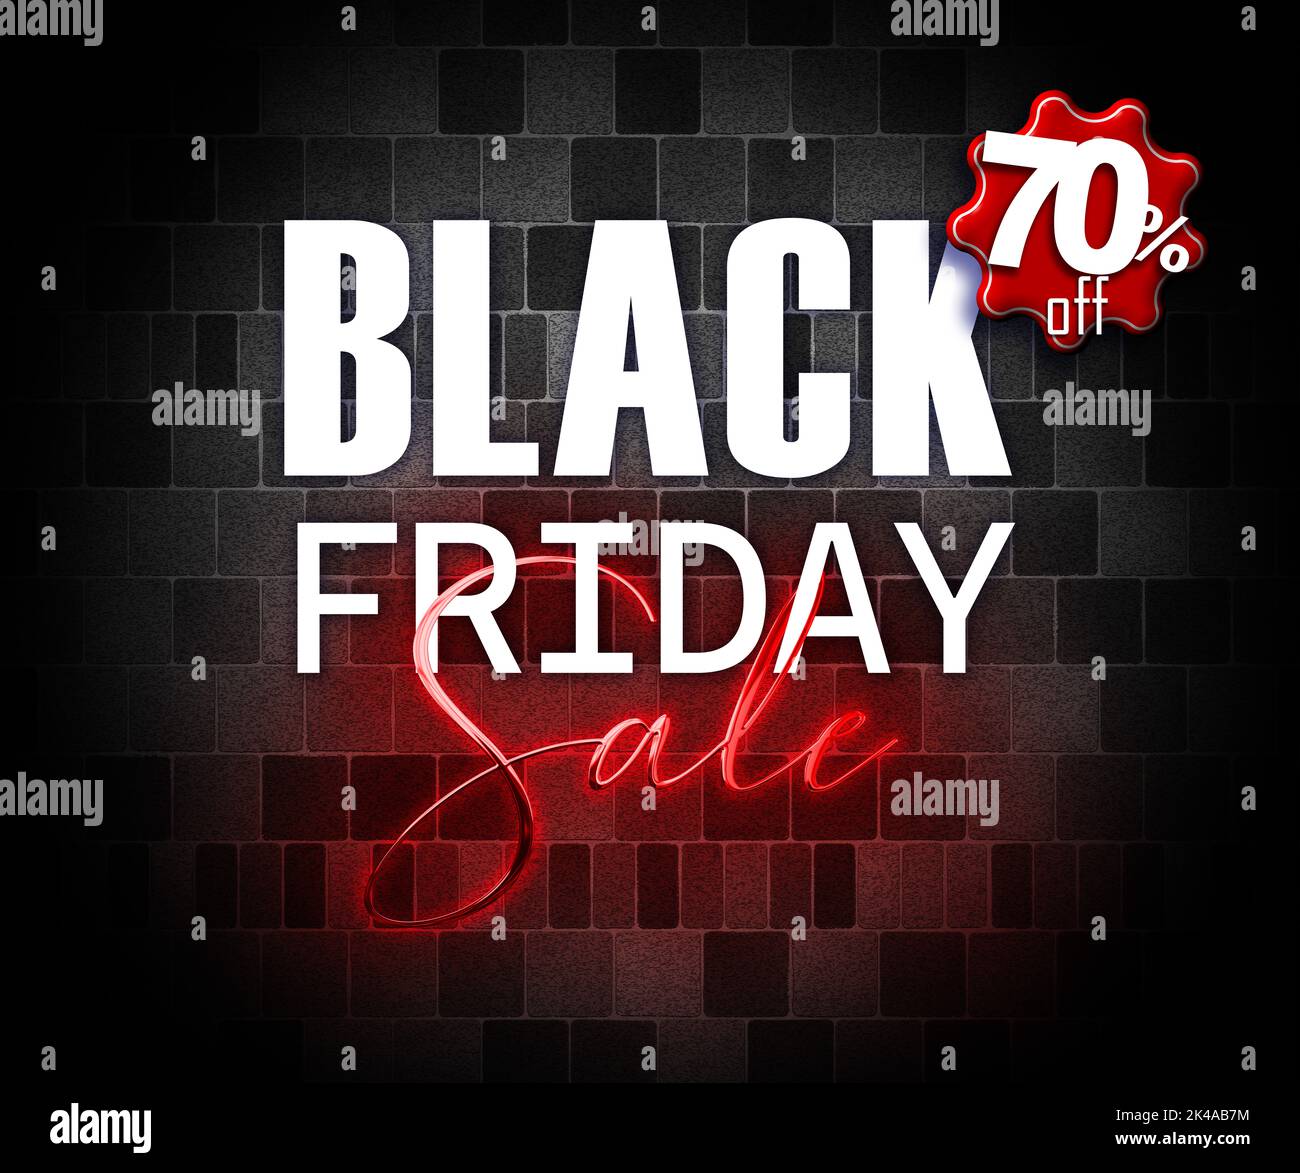 illustration with 3d elements black friday promotion banner 70 percent off sales increase Stock Photo